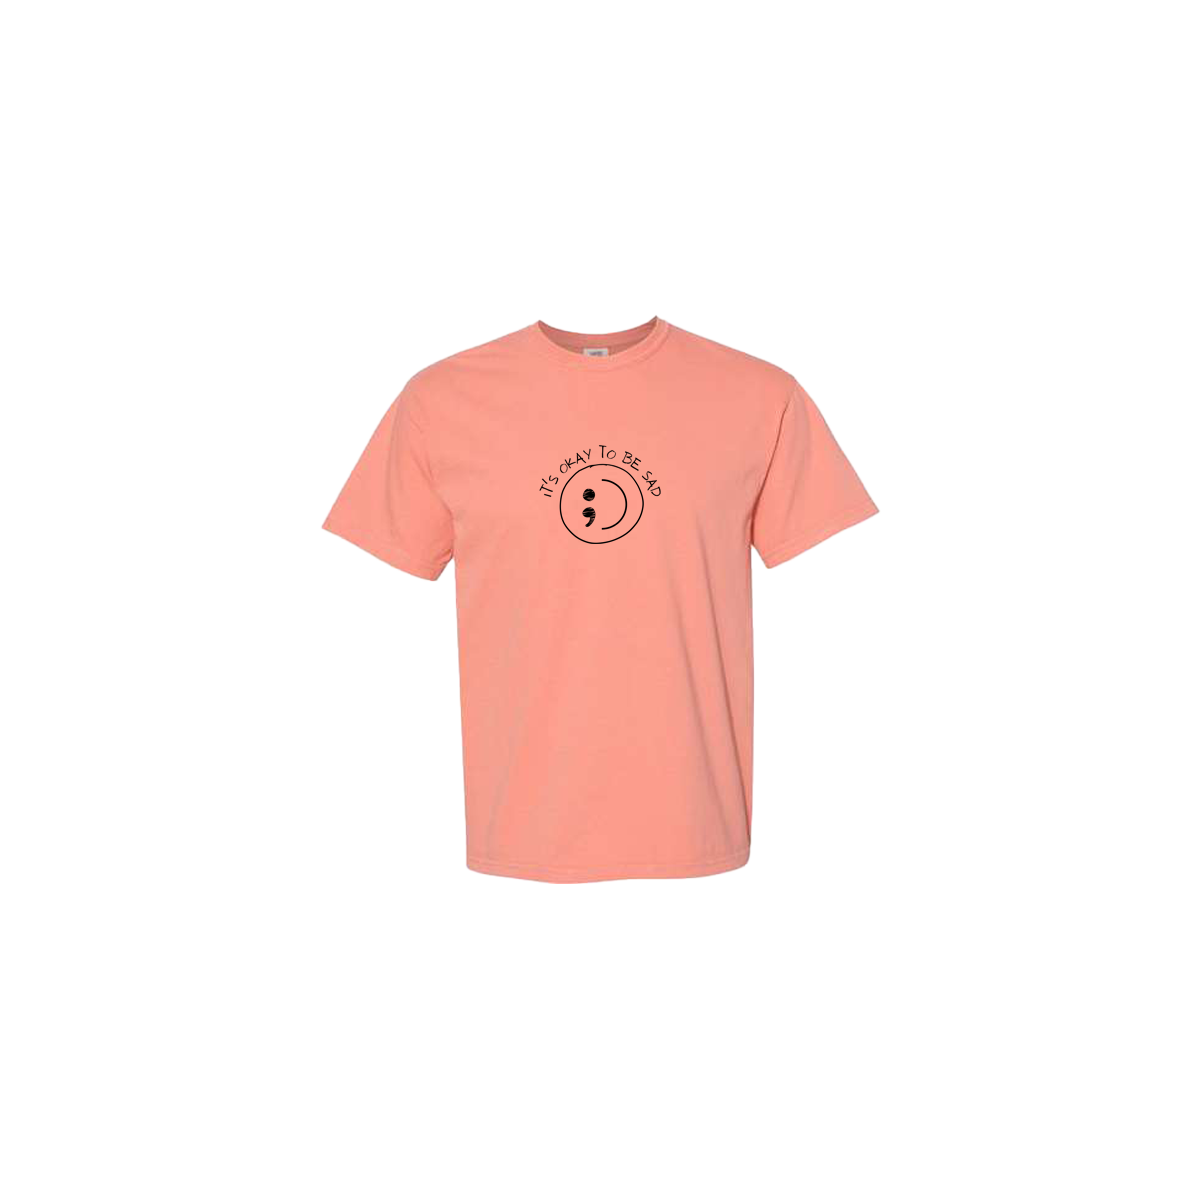 It's Okay to be Sad Embroidered Coral Tshirt - Mental Health Awareness Clothing